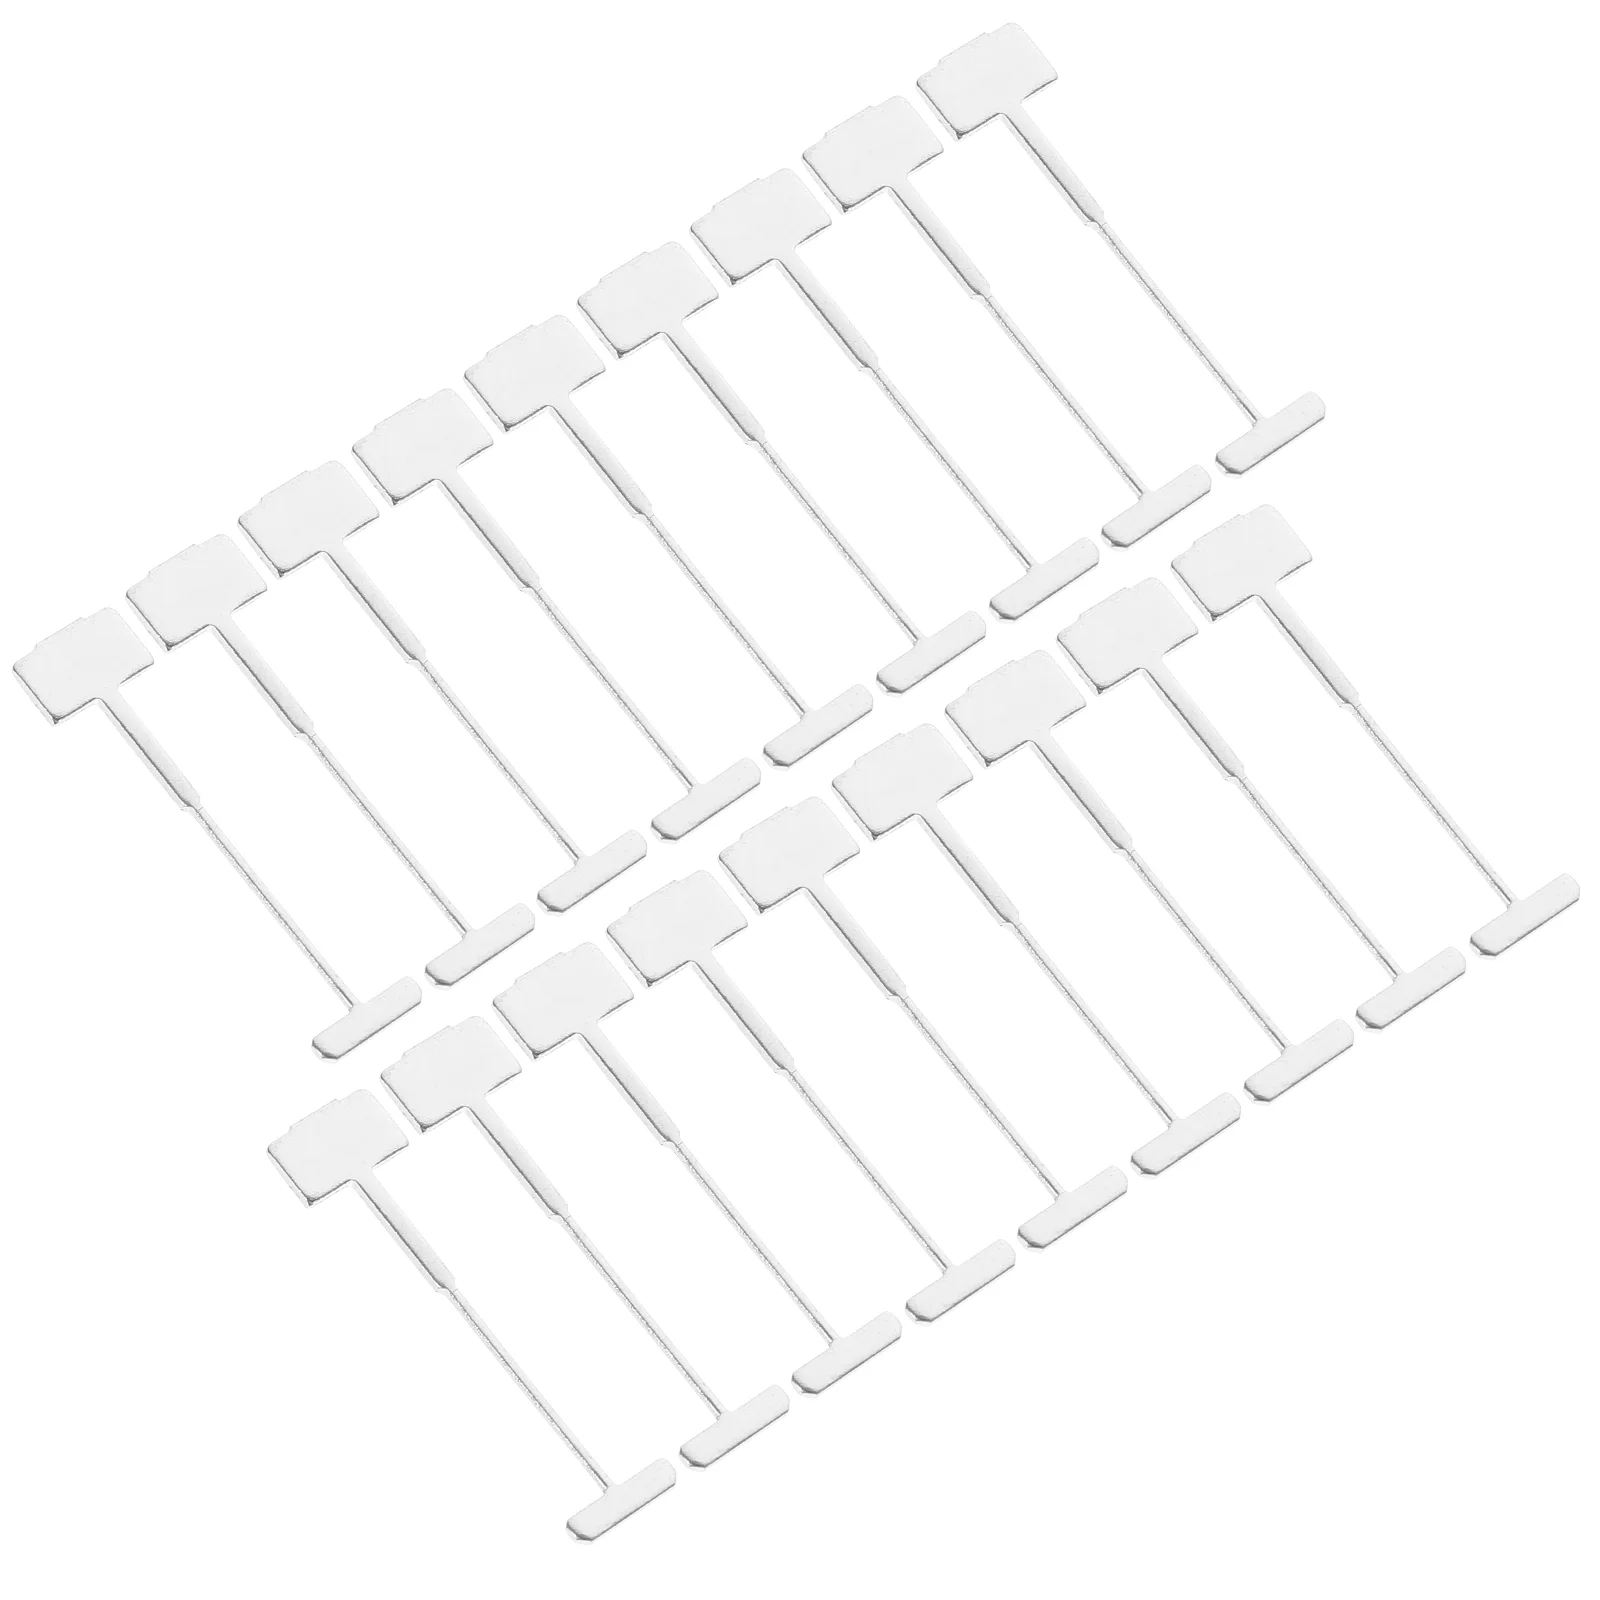 

200 Pcs Tile Spacers Leveling System Steel Needle Ceramic Tiles Spacers Leveler Replaceable Pin Shims Spirit Parts